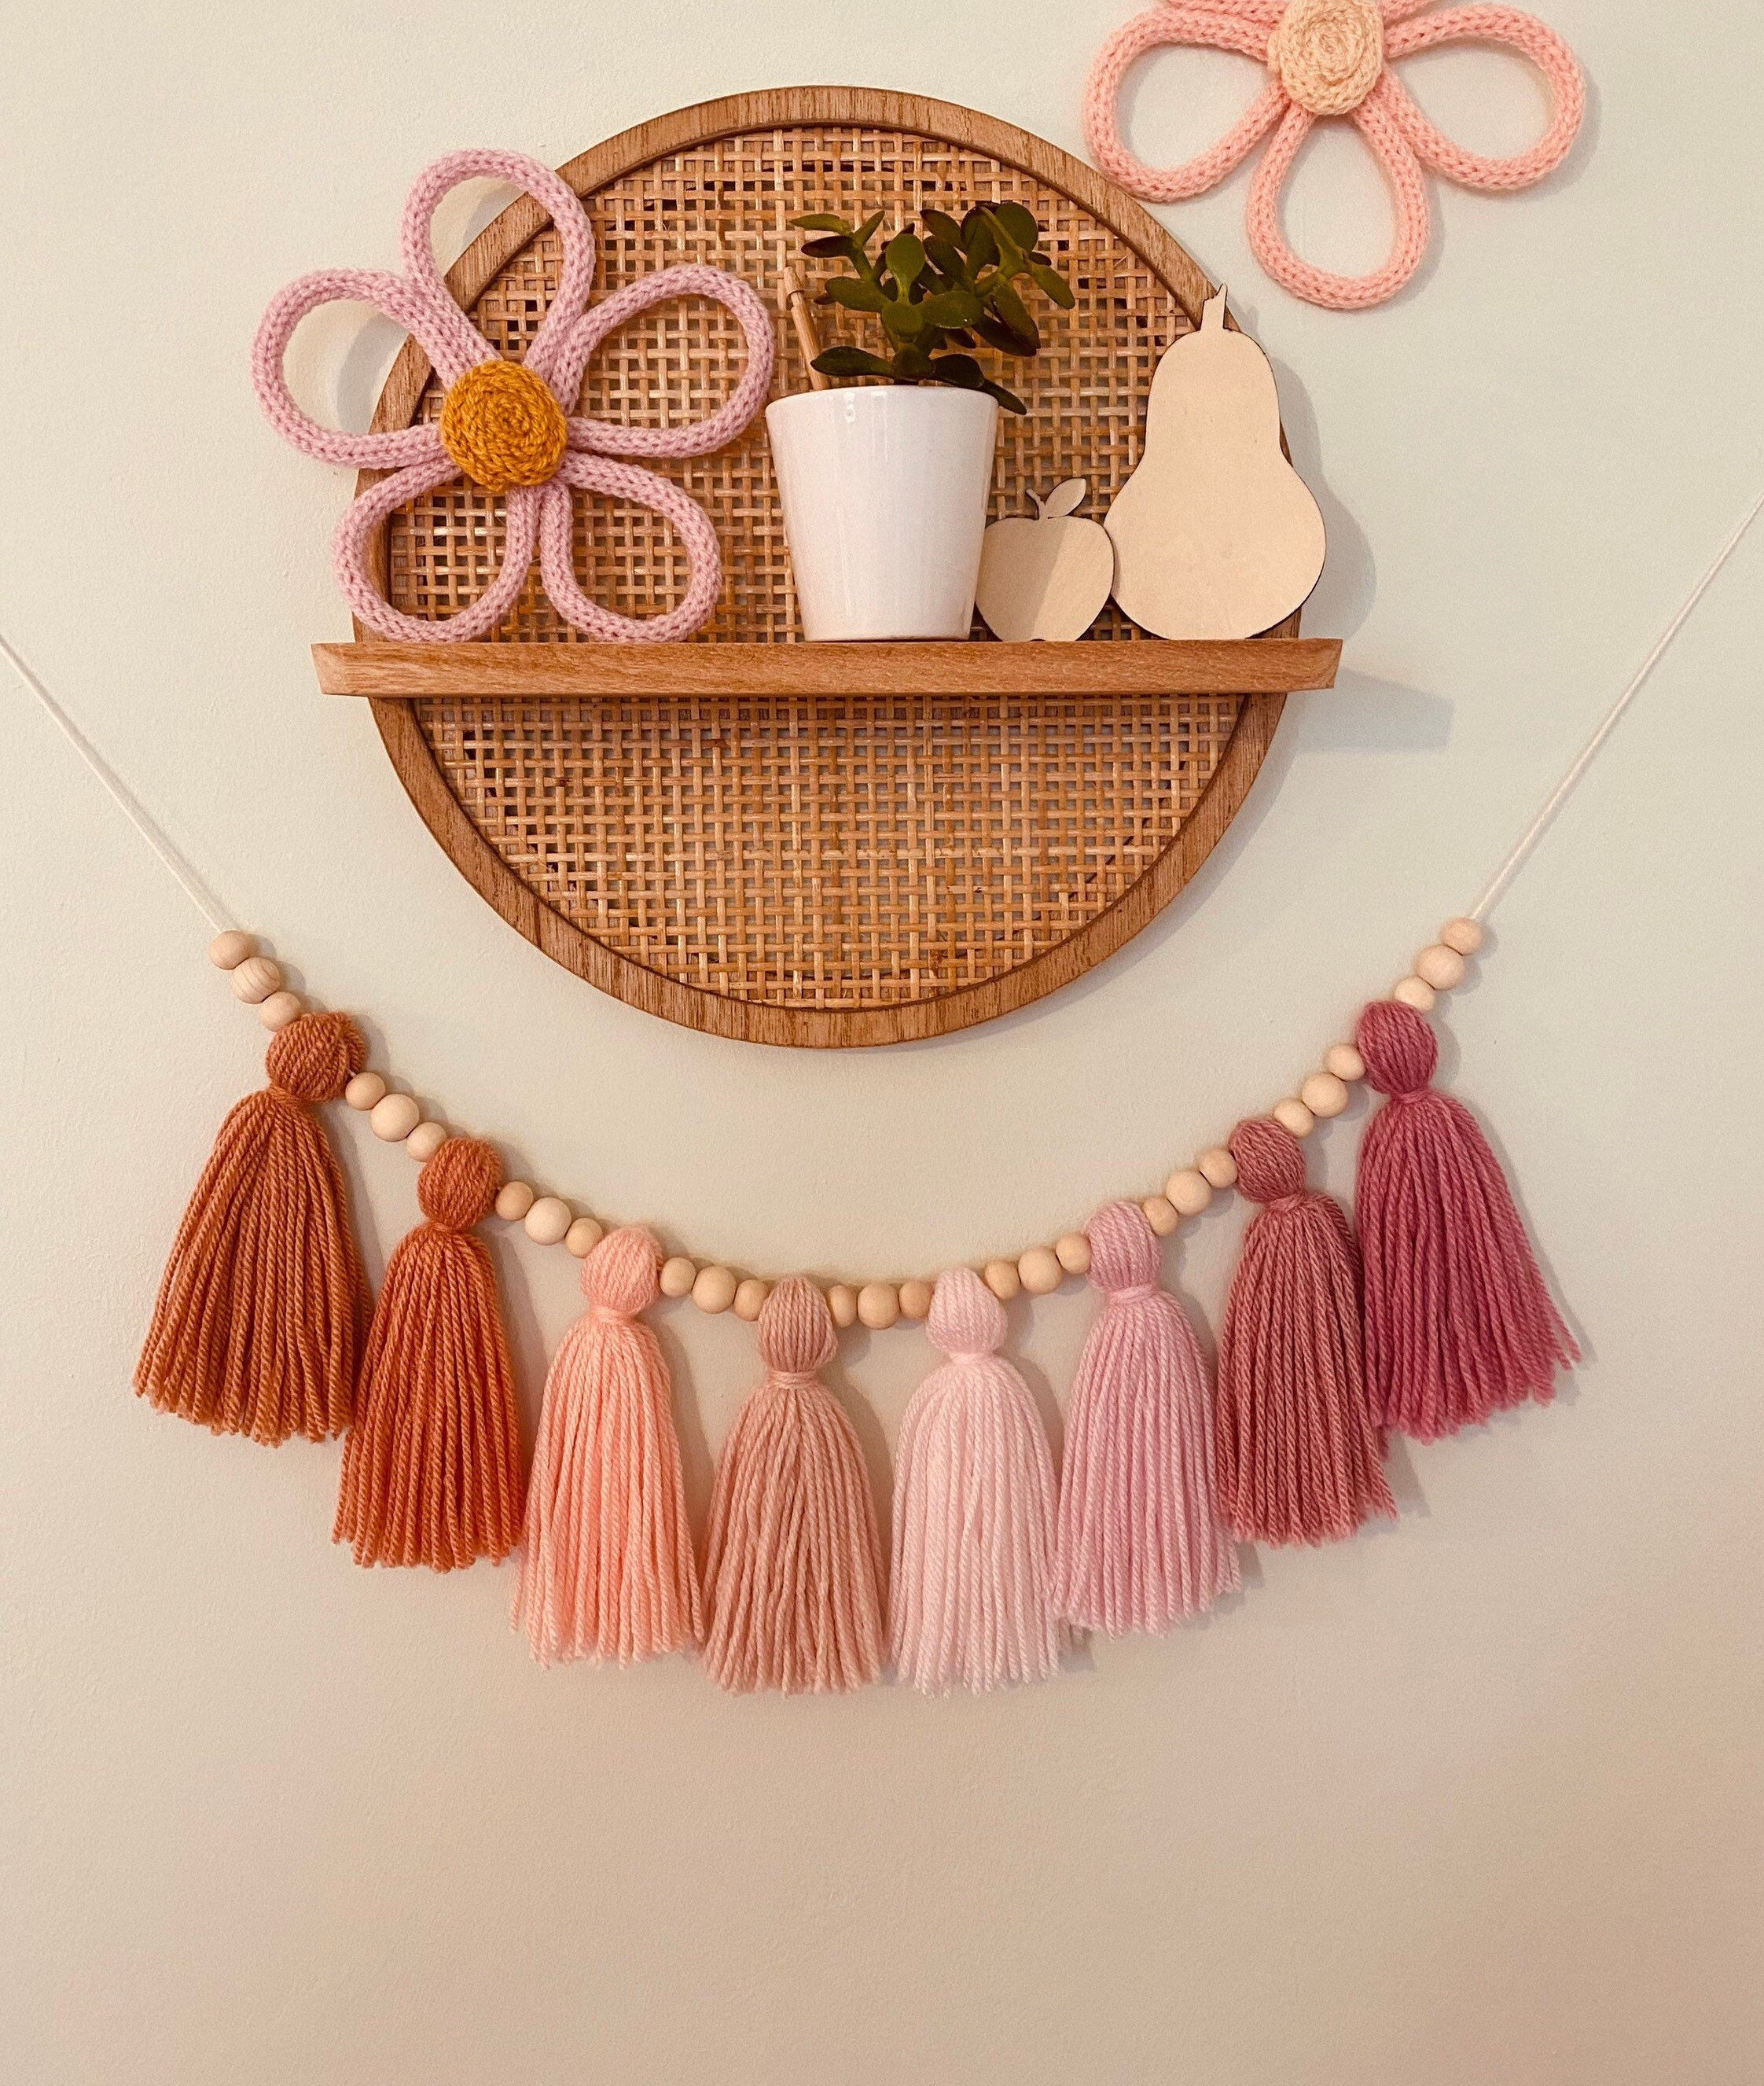 Pink and White Garland, Girl Nursery Ideas, Pom Pom Wall Hanging, Yarn Poms,  Expectant Mom Gift, Yarn Pom Pom Garland, Baby Shower Garland 